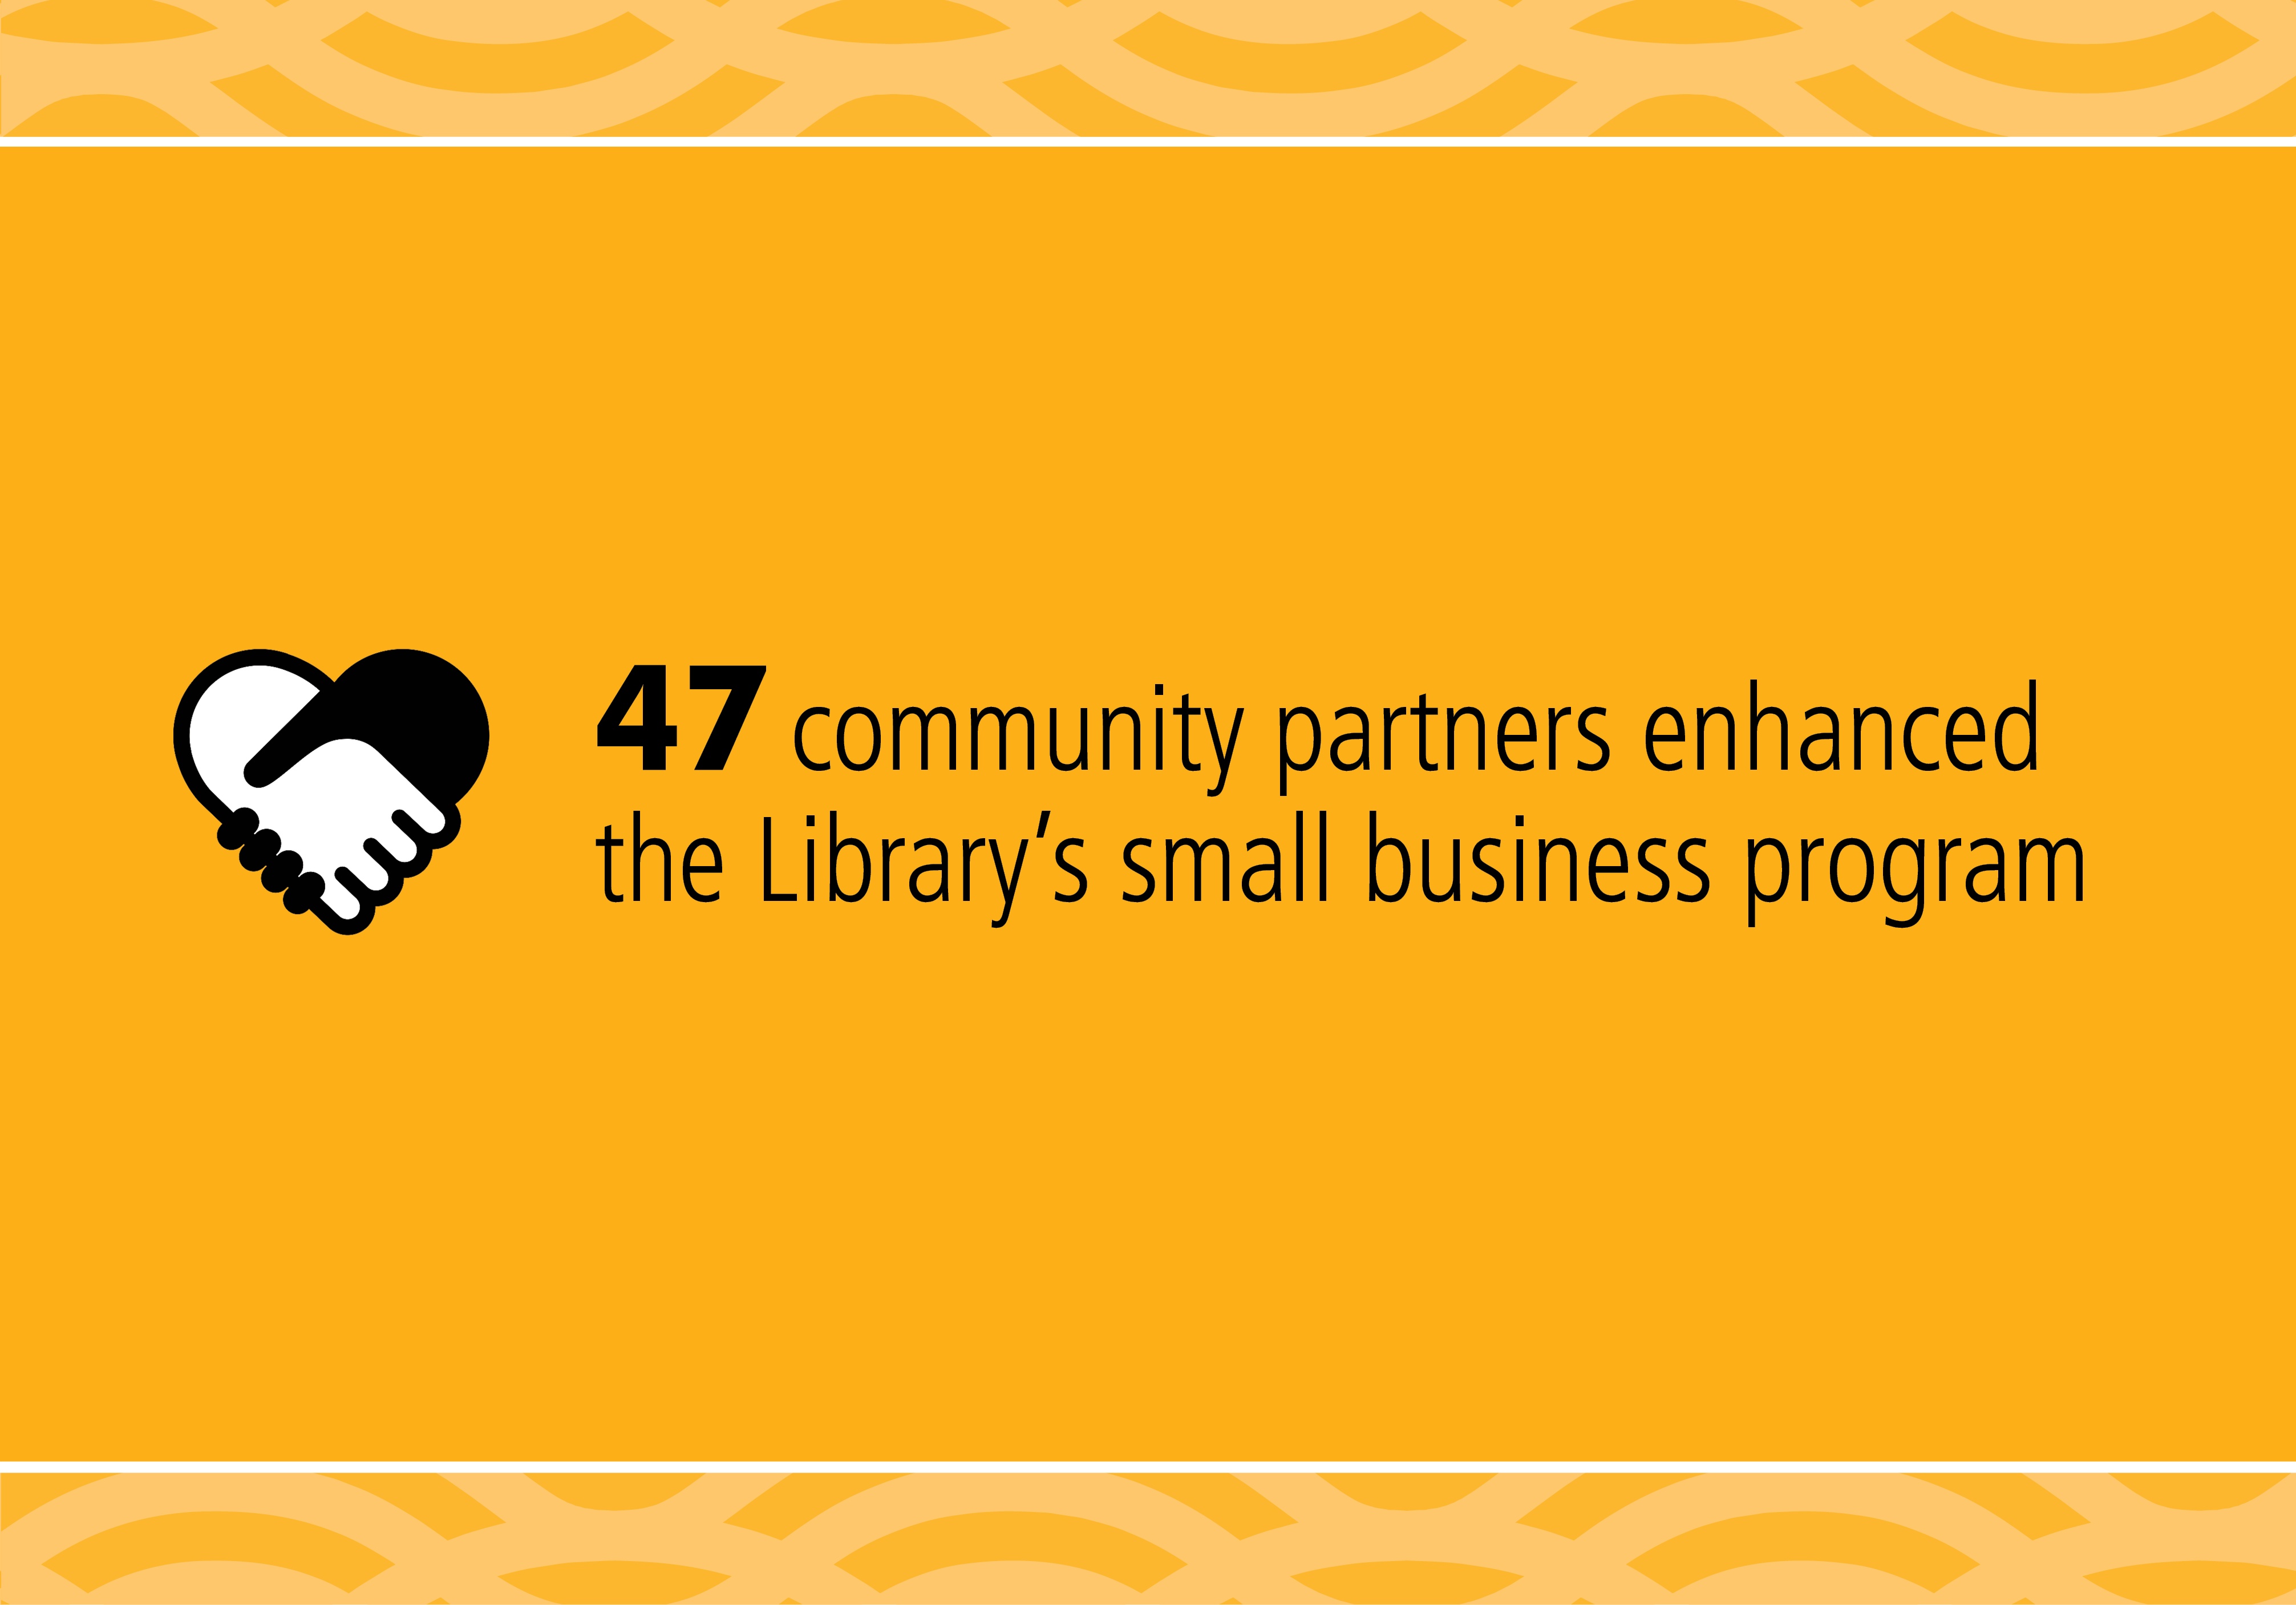 47 community partners enhanced the Library's small business program